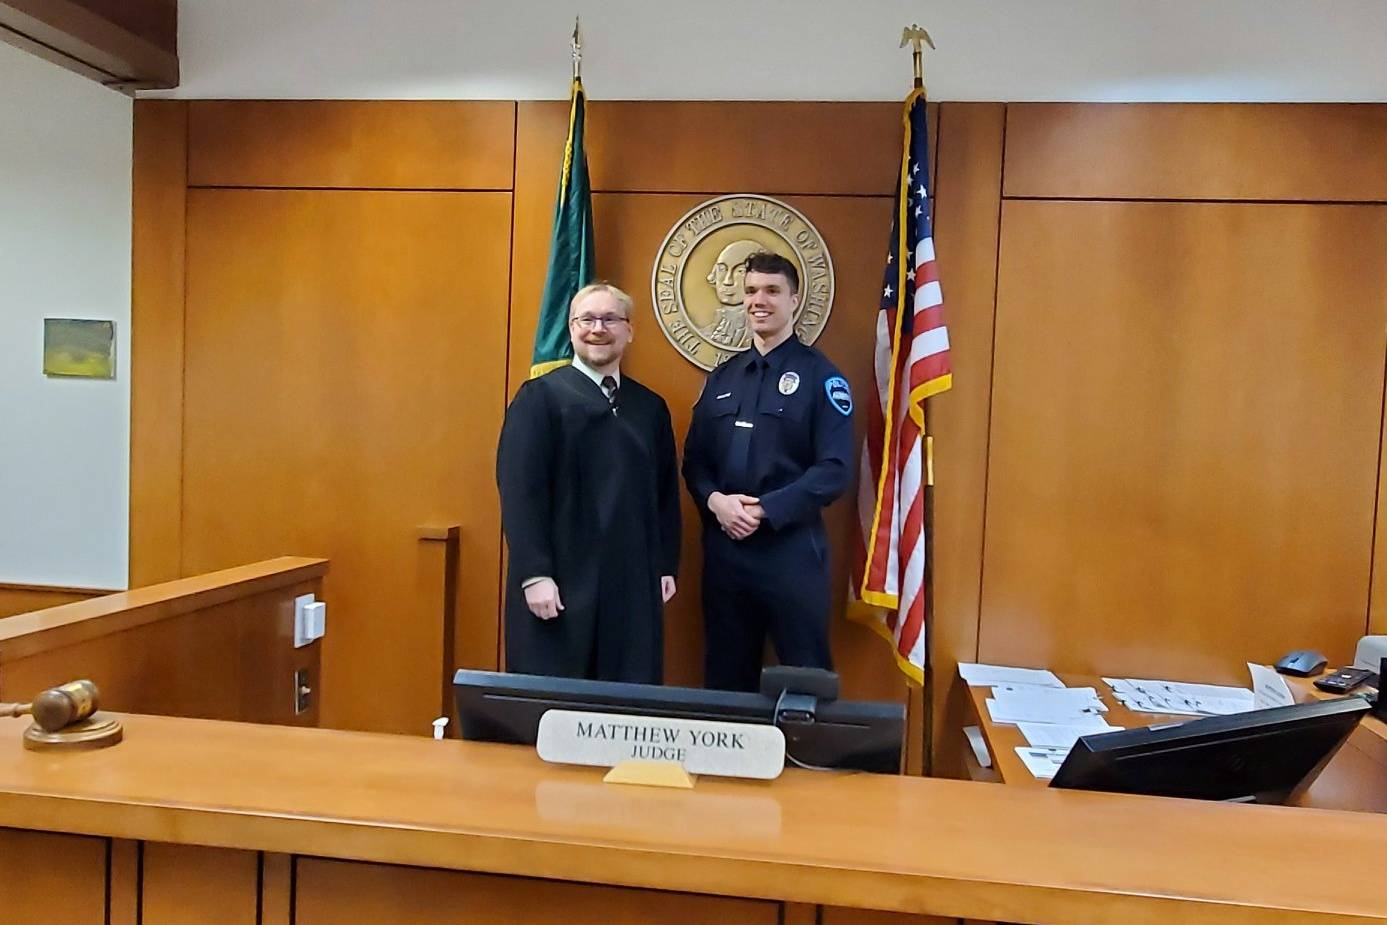 Judge Matthew York and Auburn Police Department’s Officer Burgess are shown in this 2020 photo. “Our society has gone back and forth between punishment, deferral and rehabilitation,” said York, who presides over Auburn’s Community Court. Courtesy of Auburn Police Department.